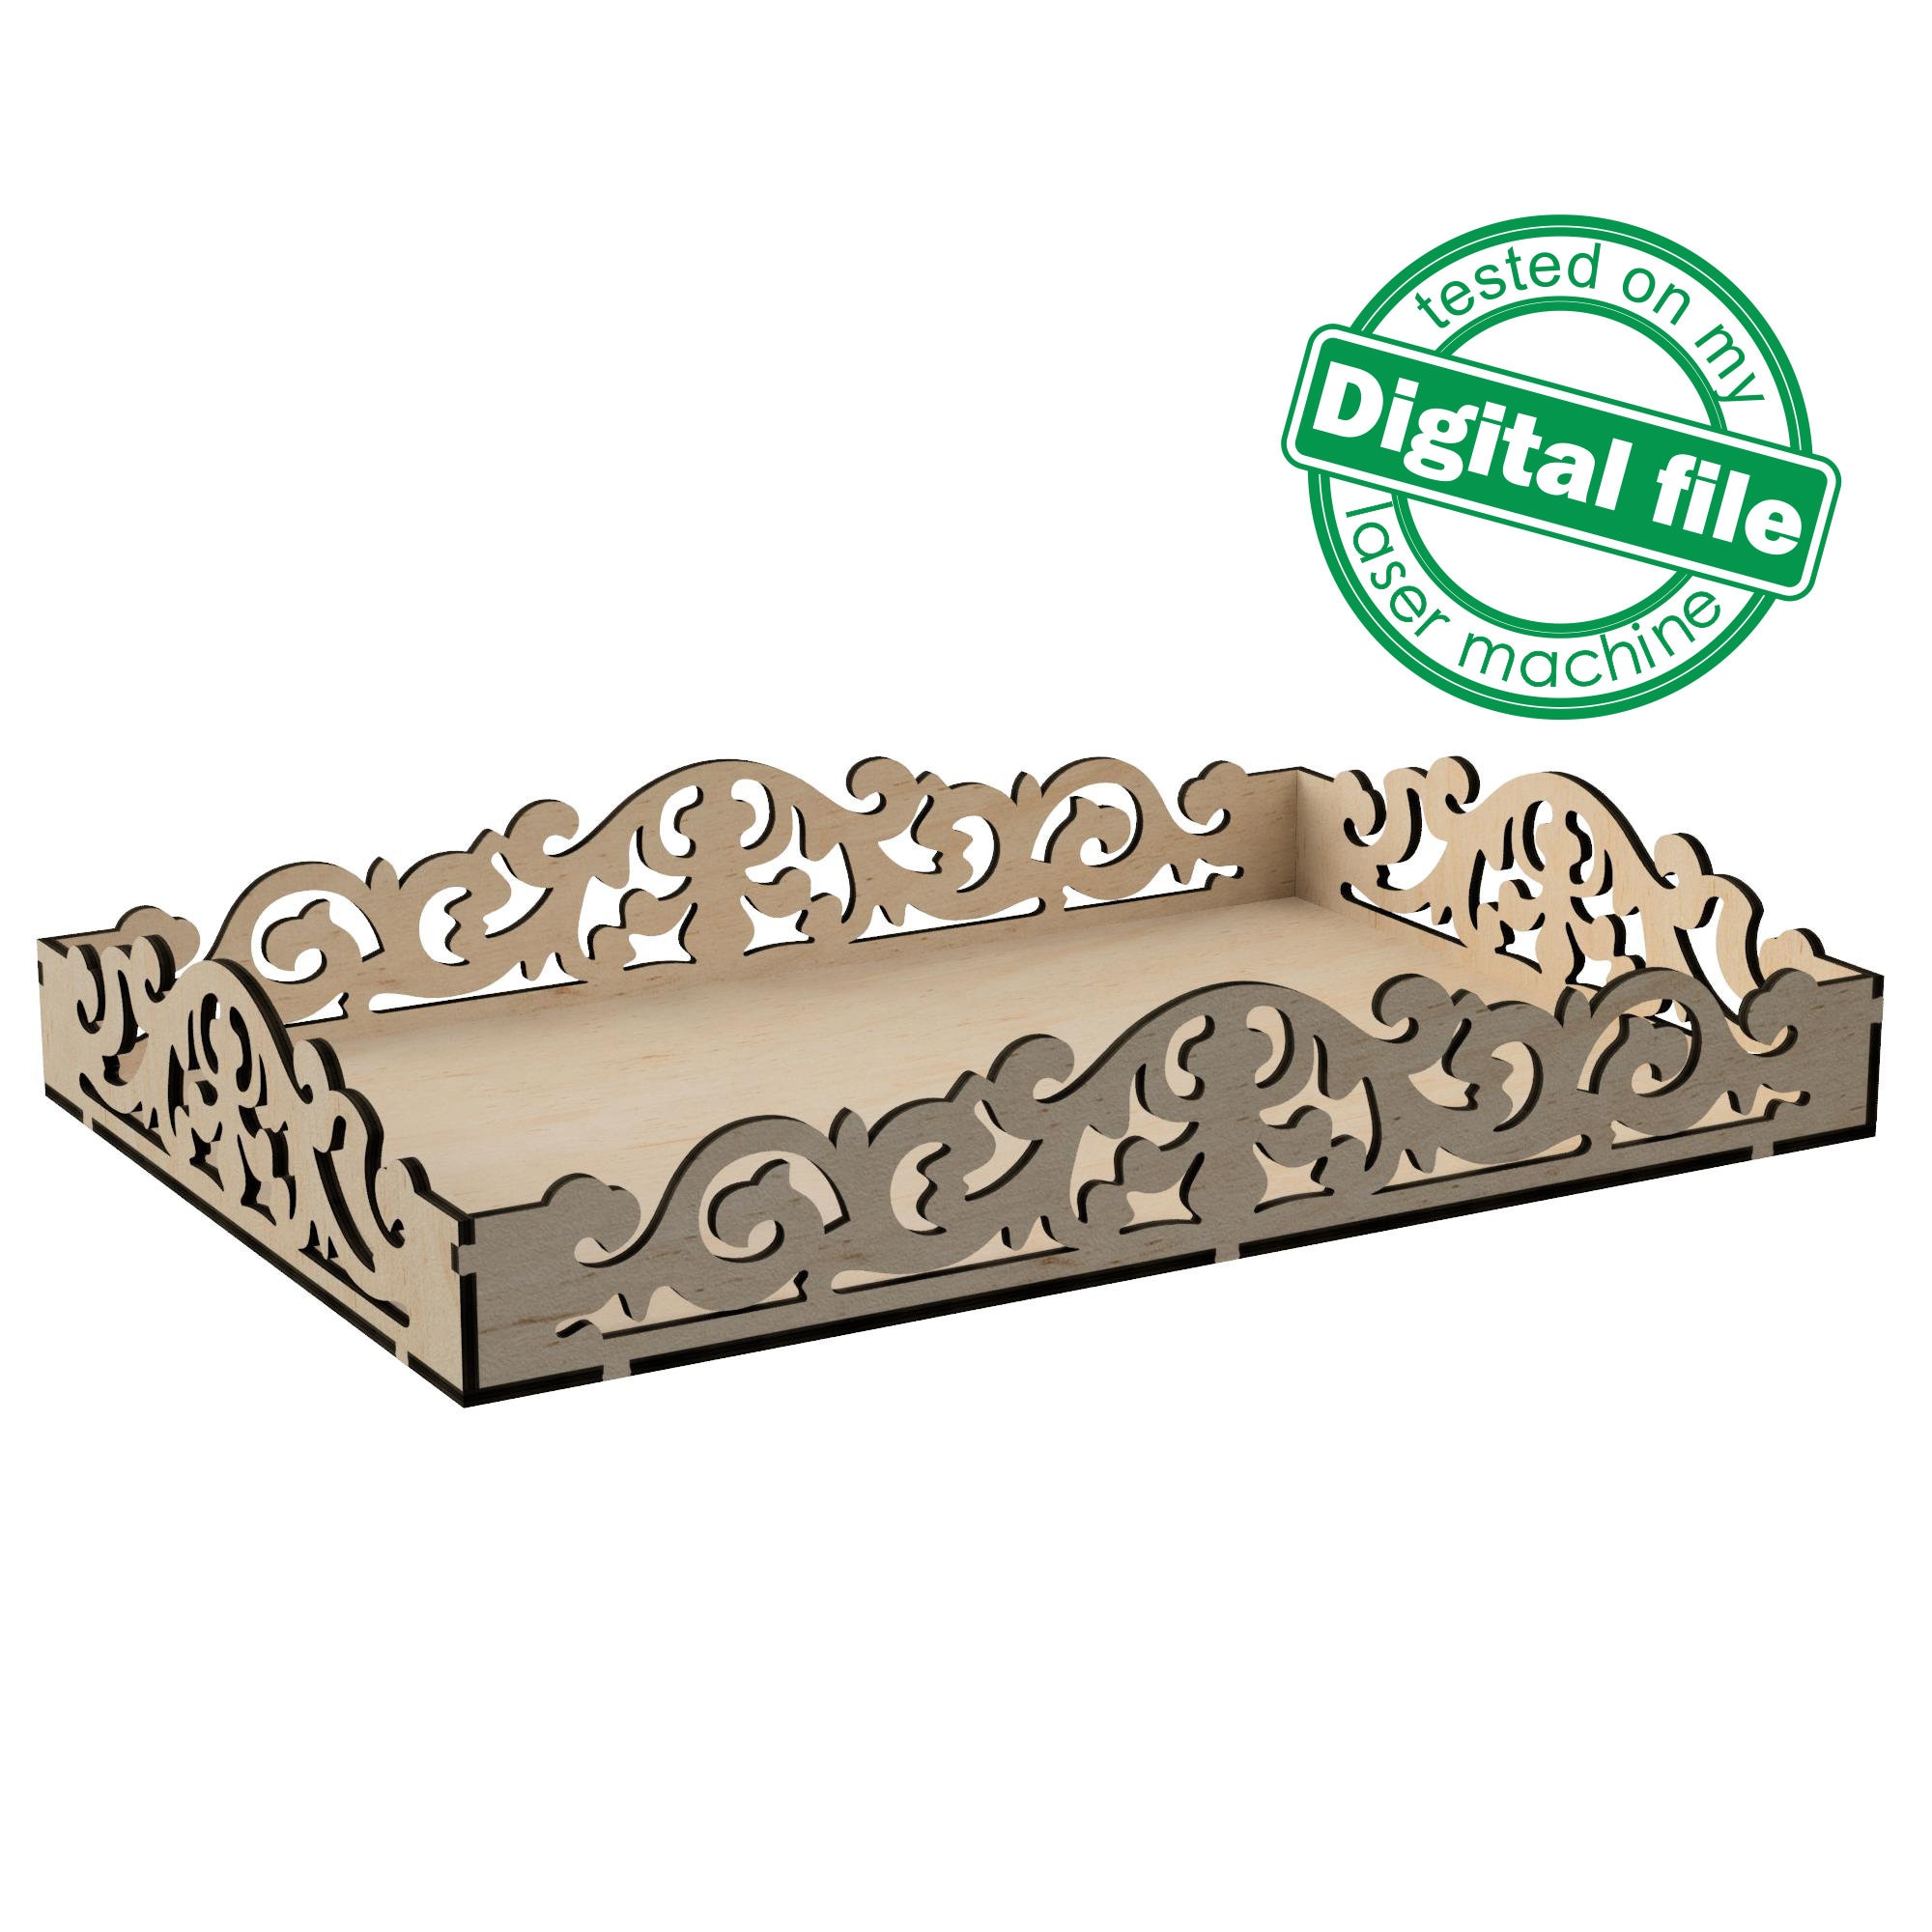 DXF, SVG Files for Laser Gift Book Box Living Hinge, Flexible Plywood,  Openwork Retro Pattern, Glowforge, Material 1/8'' 3.2 Mm 